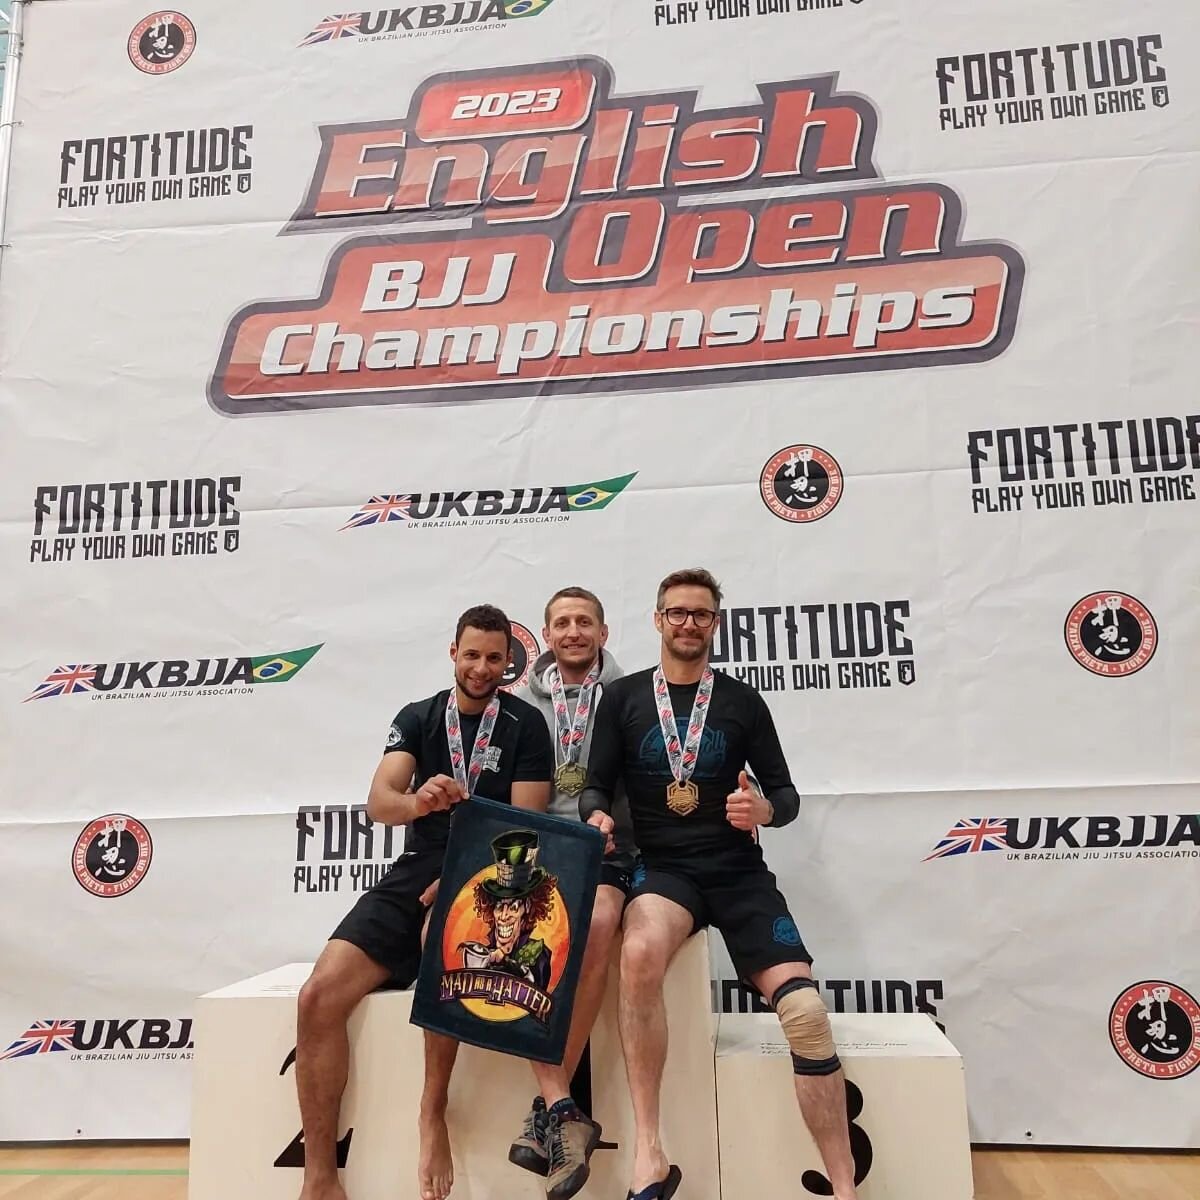 2 gold's and a bronze for the Honda driving medal catchers.
@piotr @stuartmclean75 and @warrenholly11 at @englishopenbjj 

Great work, very proud to have you out there flying the @madhattersasylum banner. 

🎩🥇🎩🥇🎩🥇🎩🥇🎩🥇🎩🥇